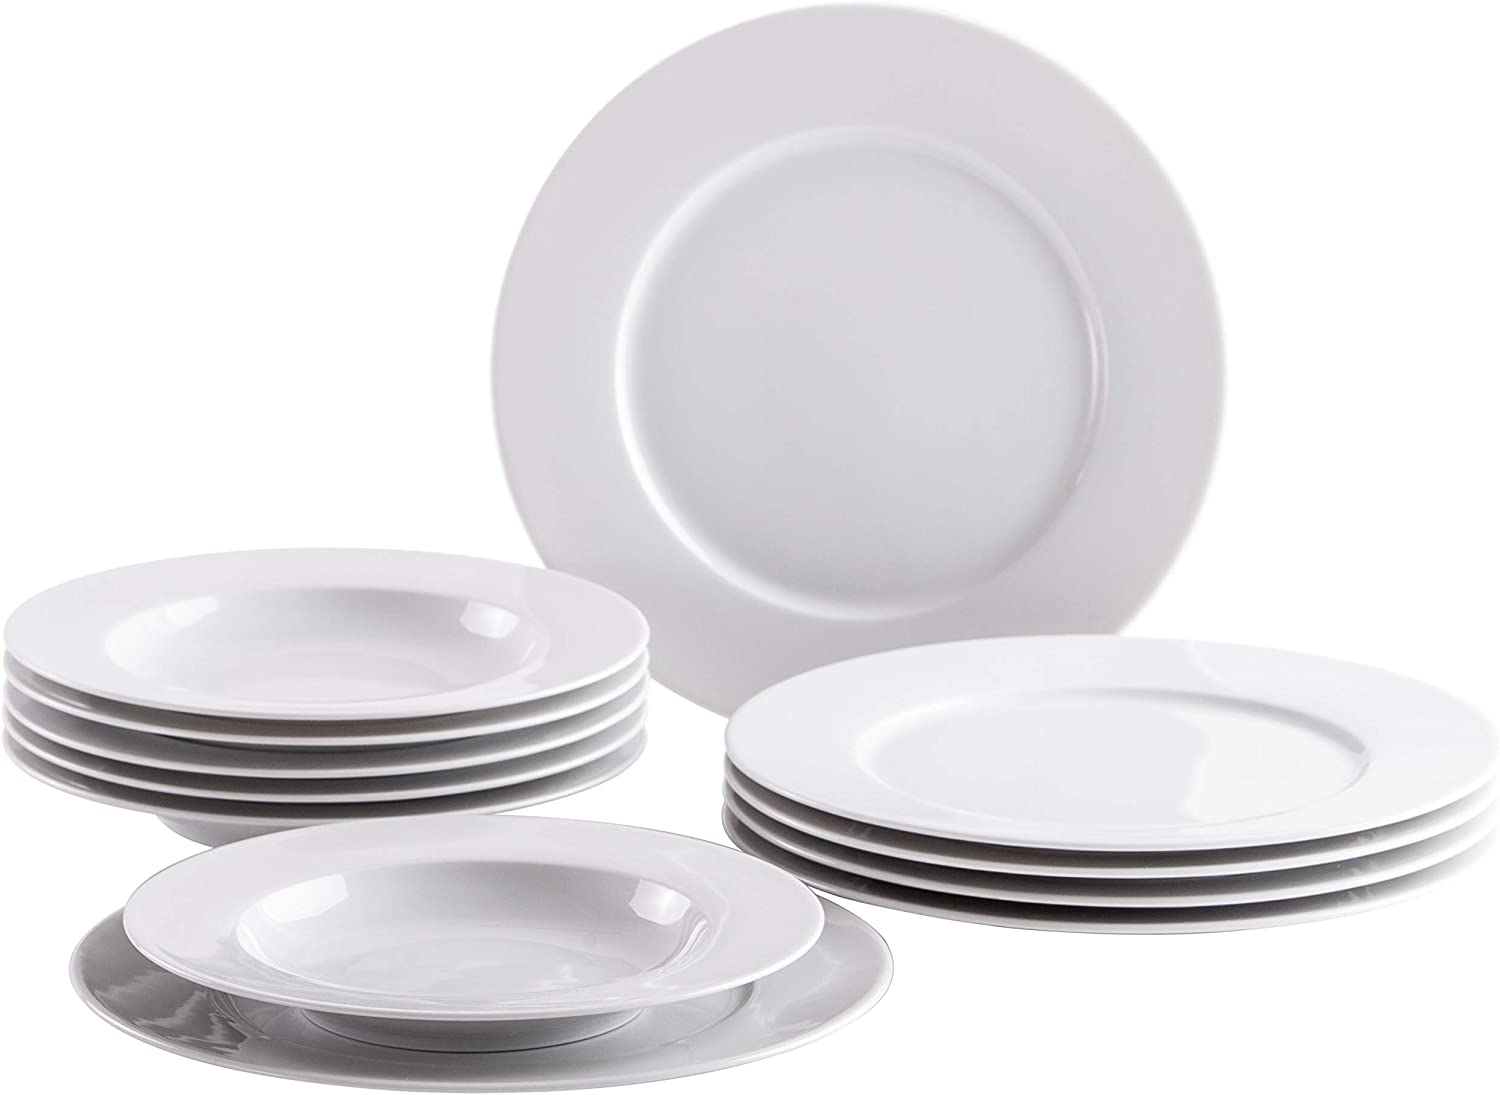 Kahla Aronda 45A133O90045B Dinner Service 12 Pieces Porcelain without Pattern Plate Set for 6 People White Round Soup Plate 23 cm Large Dinner Plate 27 cm